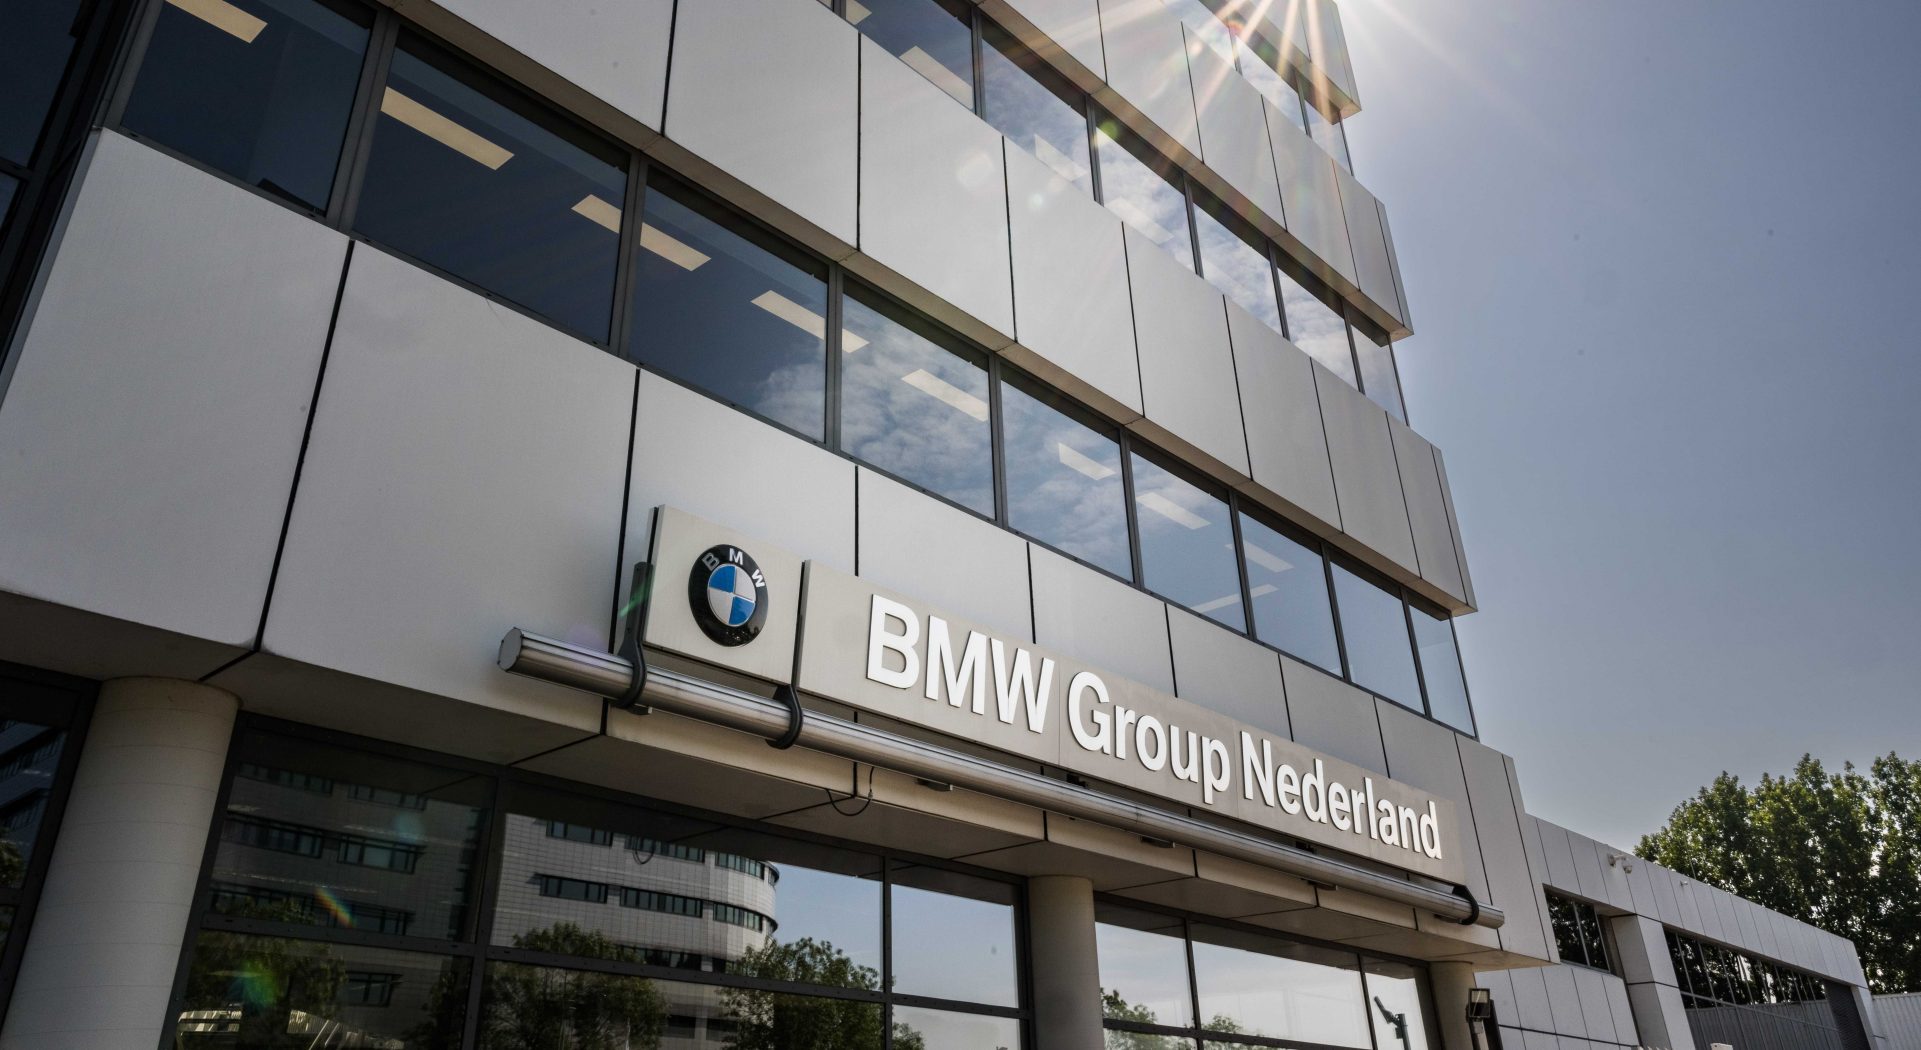 Our BMW Group entities in the Netherlands.